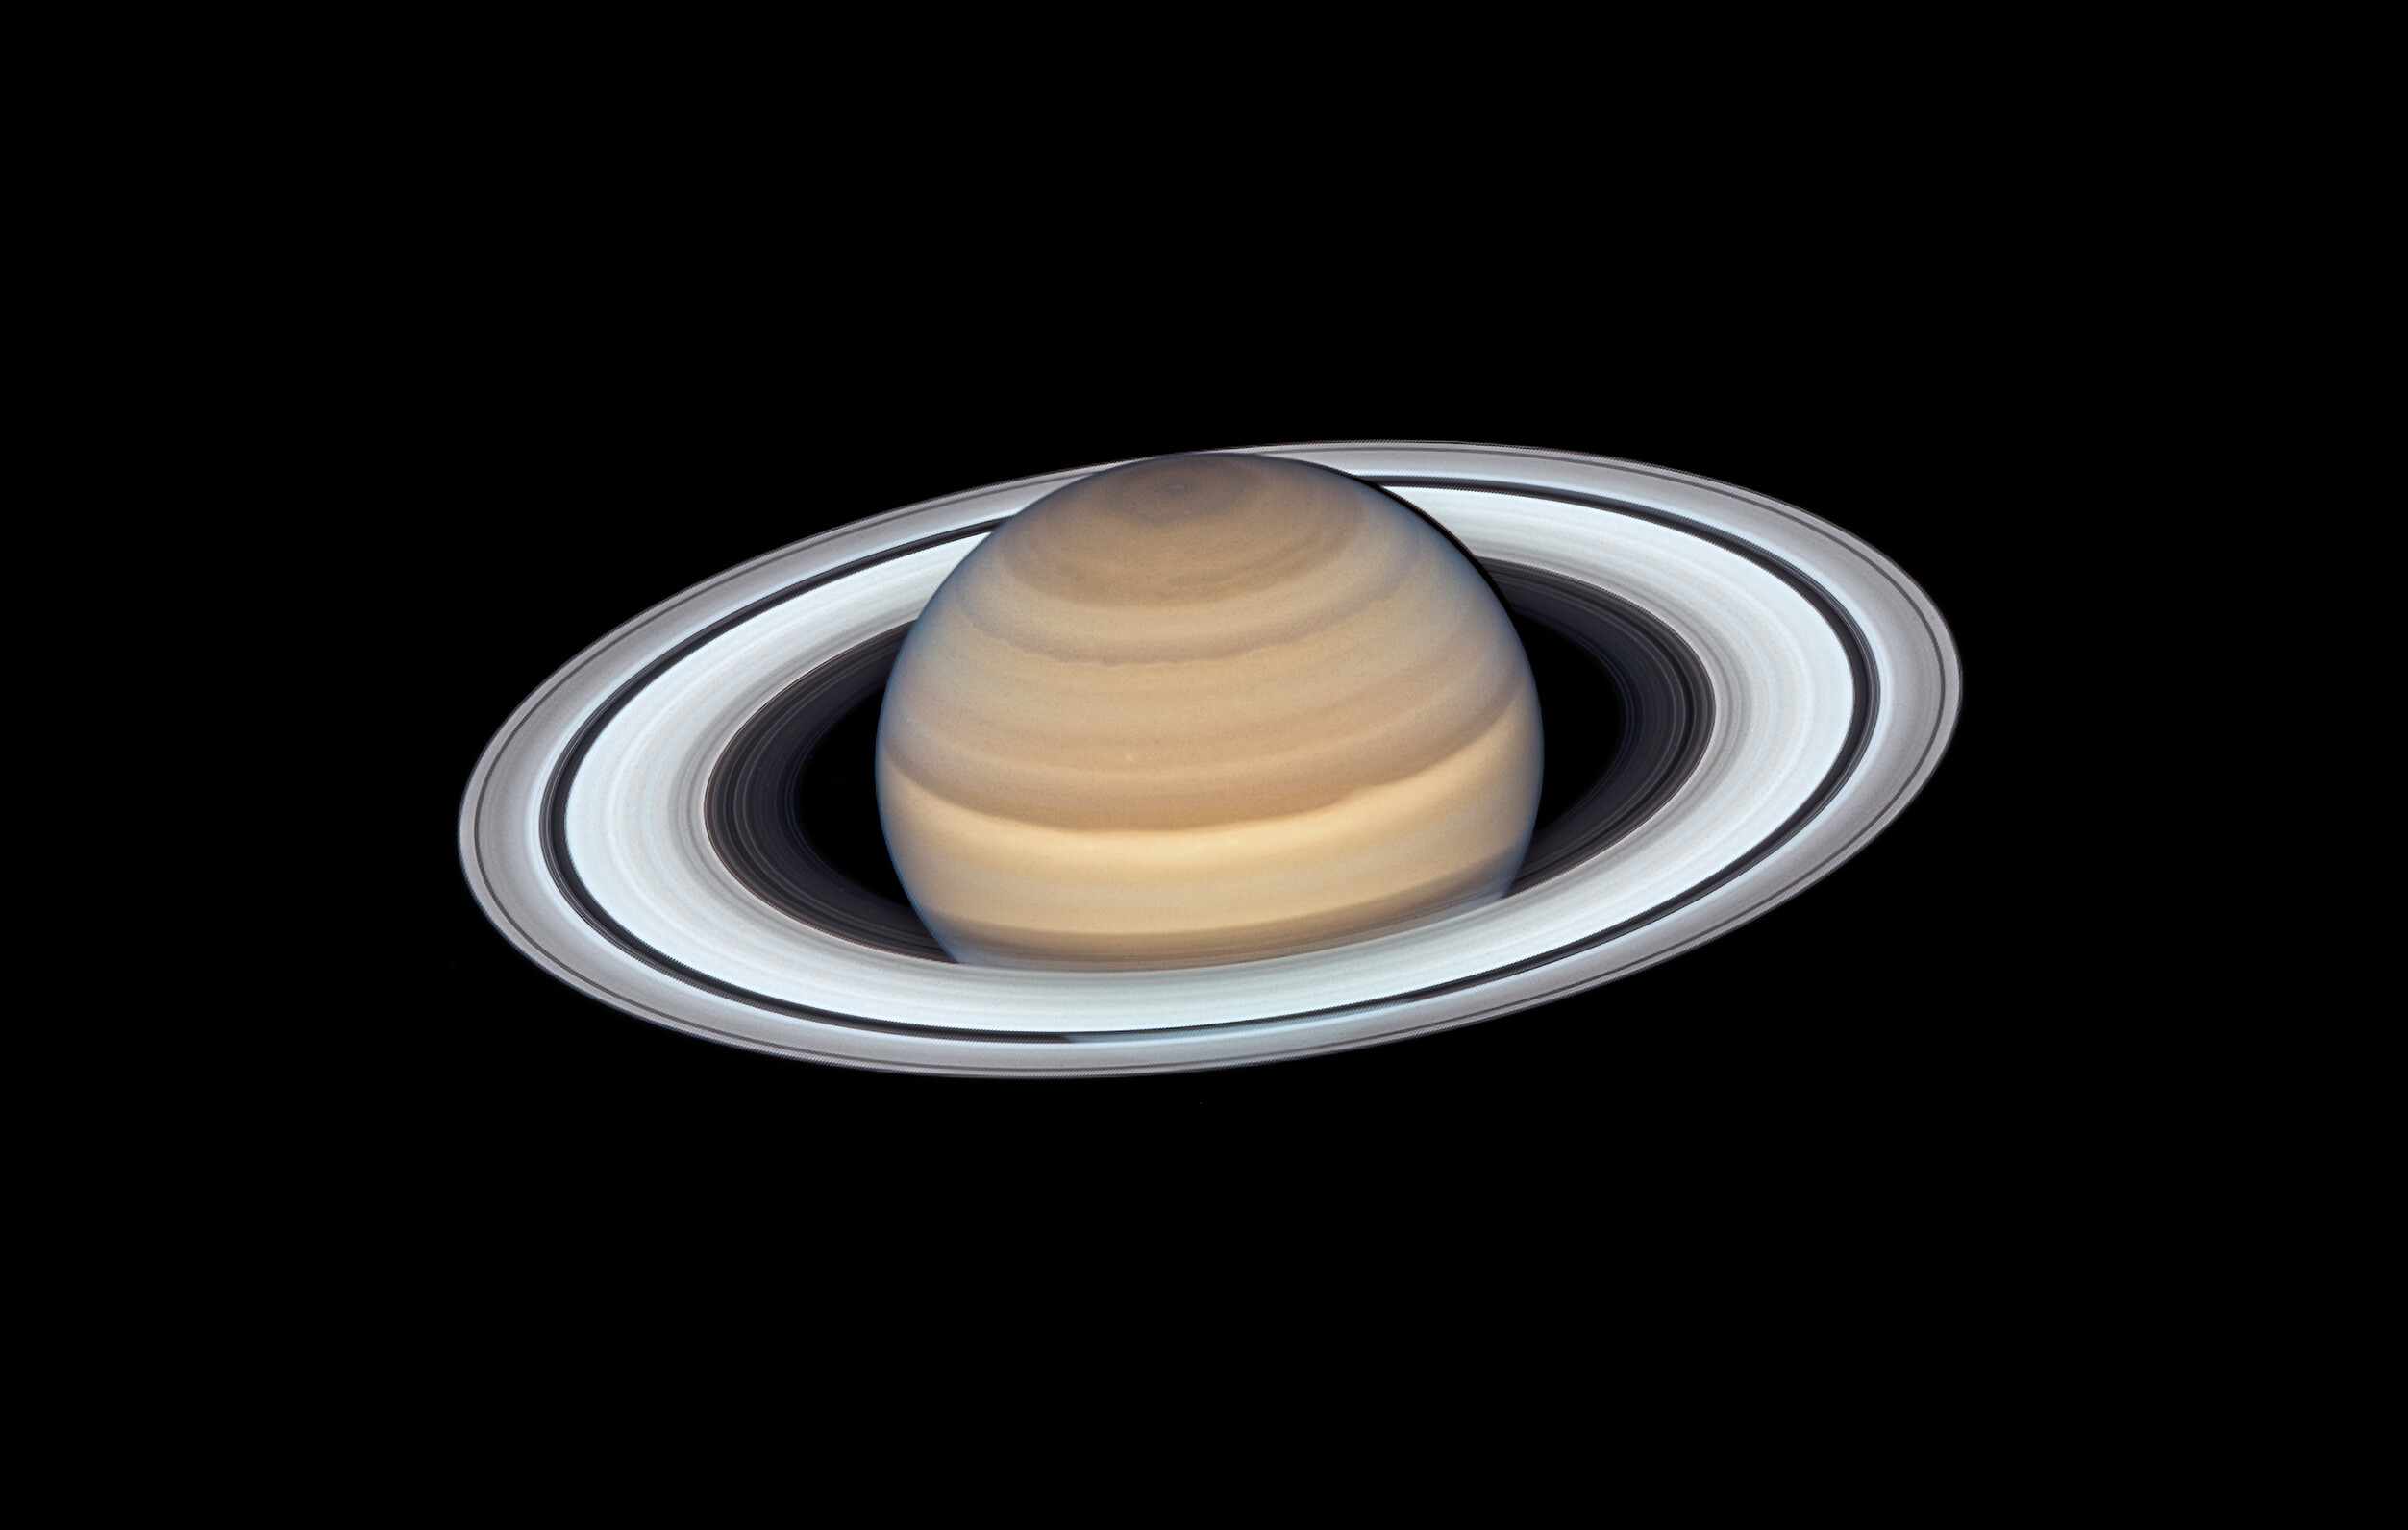 The planet Saturn with pale brownish cloud ribbons and its thin and extended greyish rings